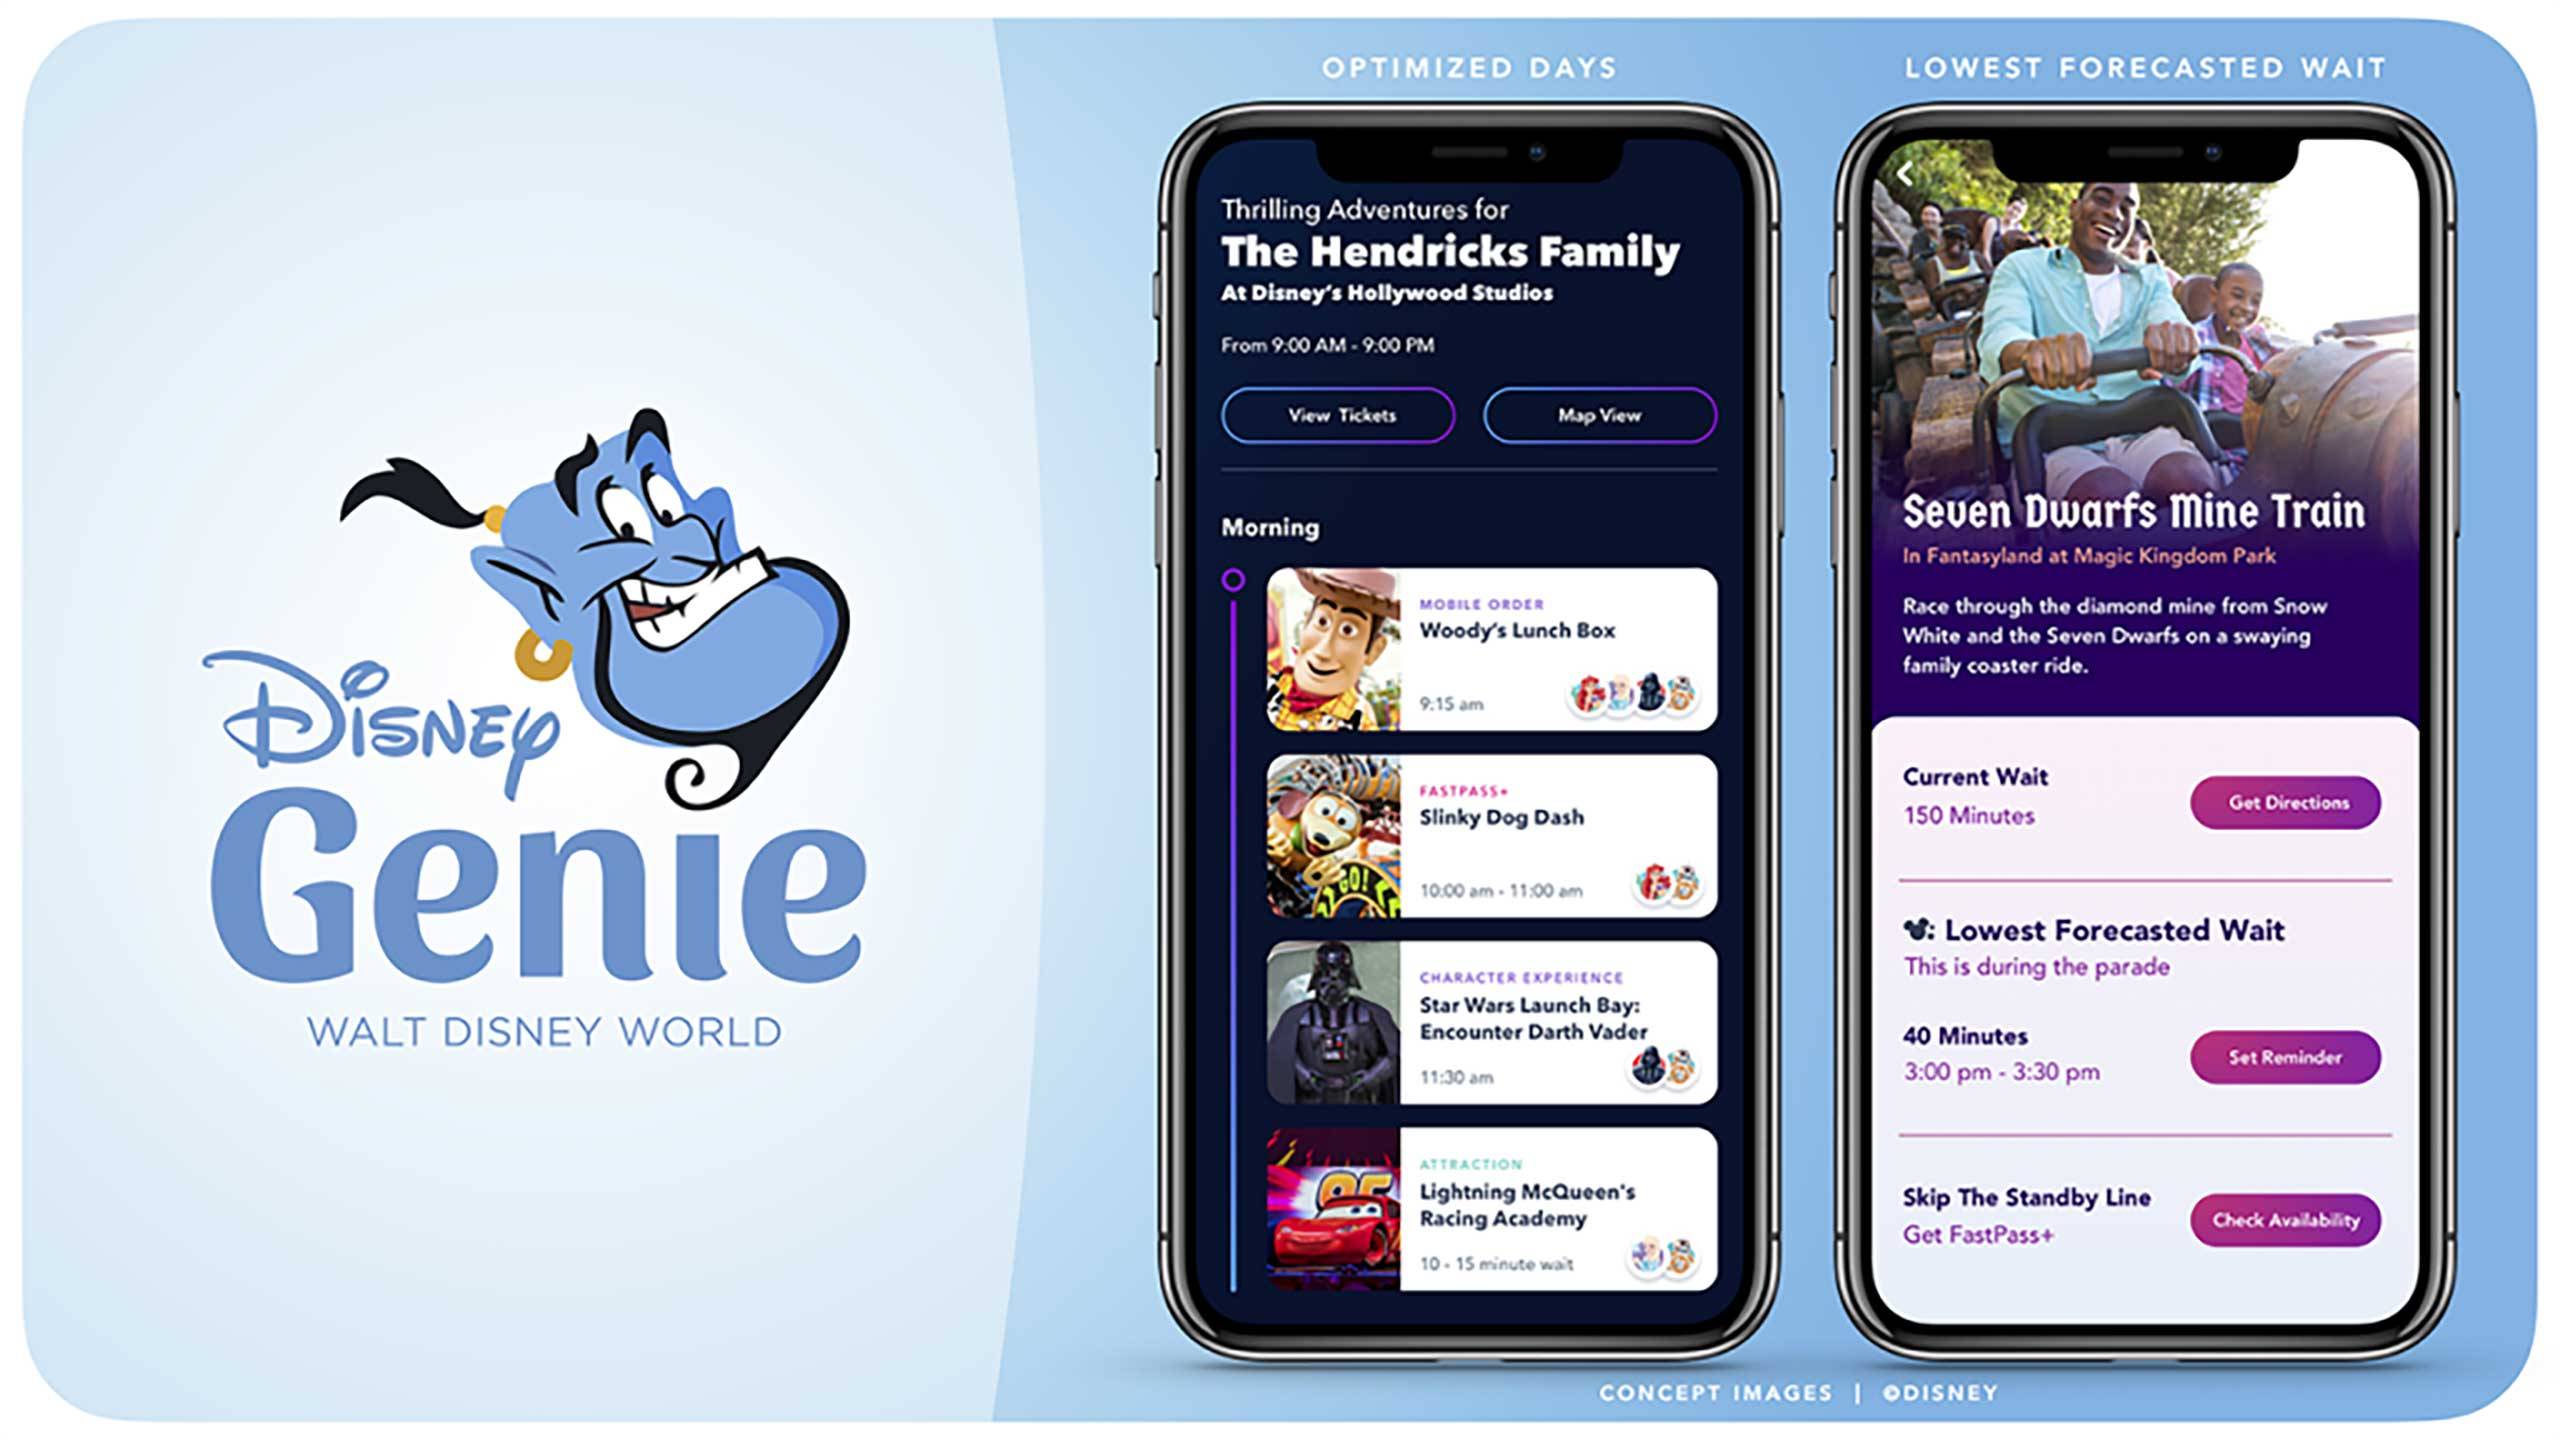 Disney Genie was originally announced back in 2019 and now Disney is revealing how it will work